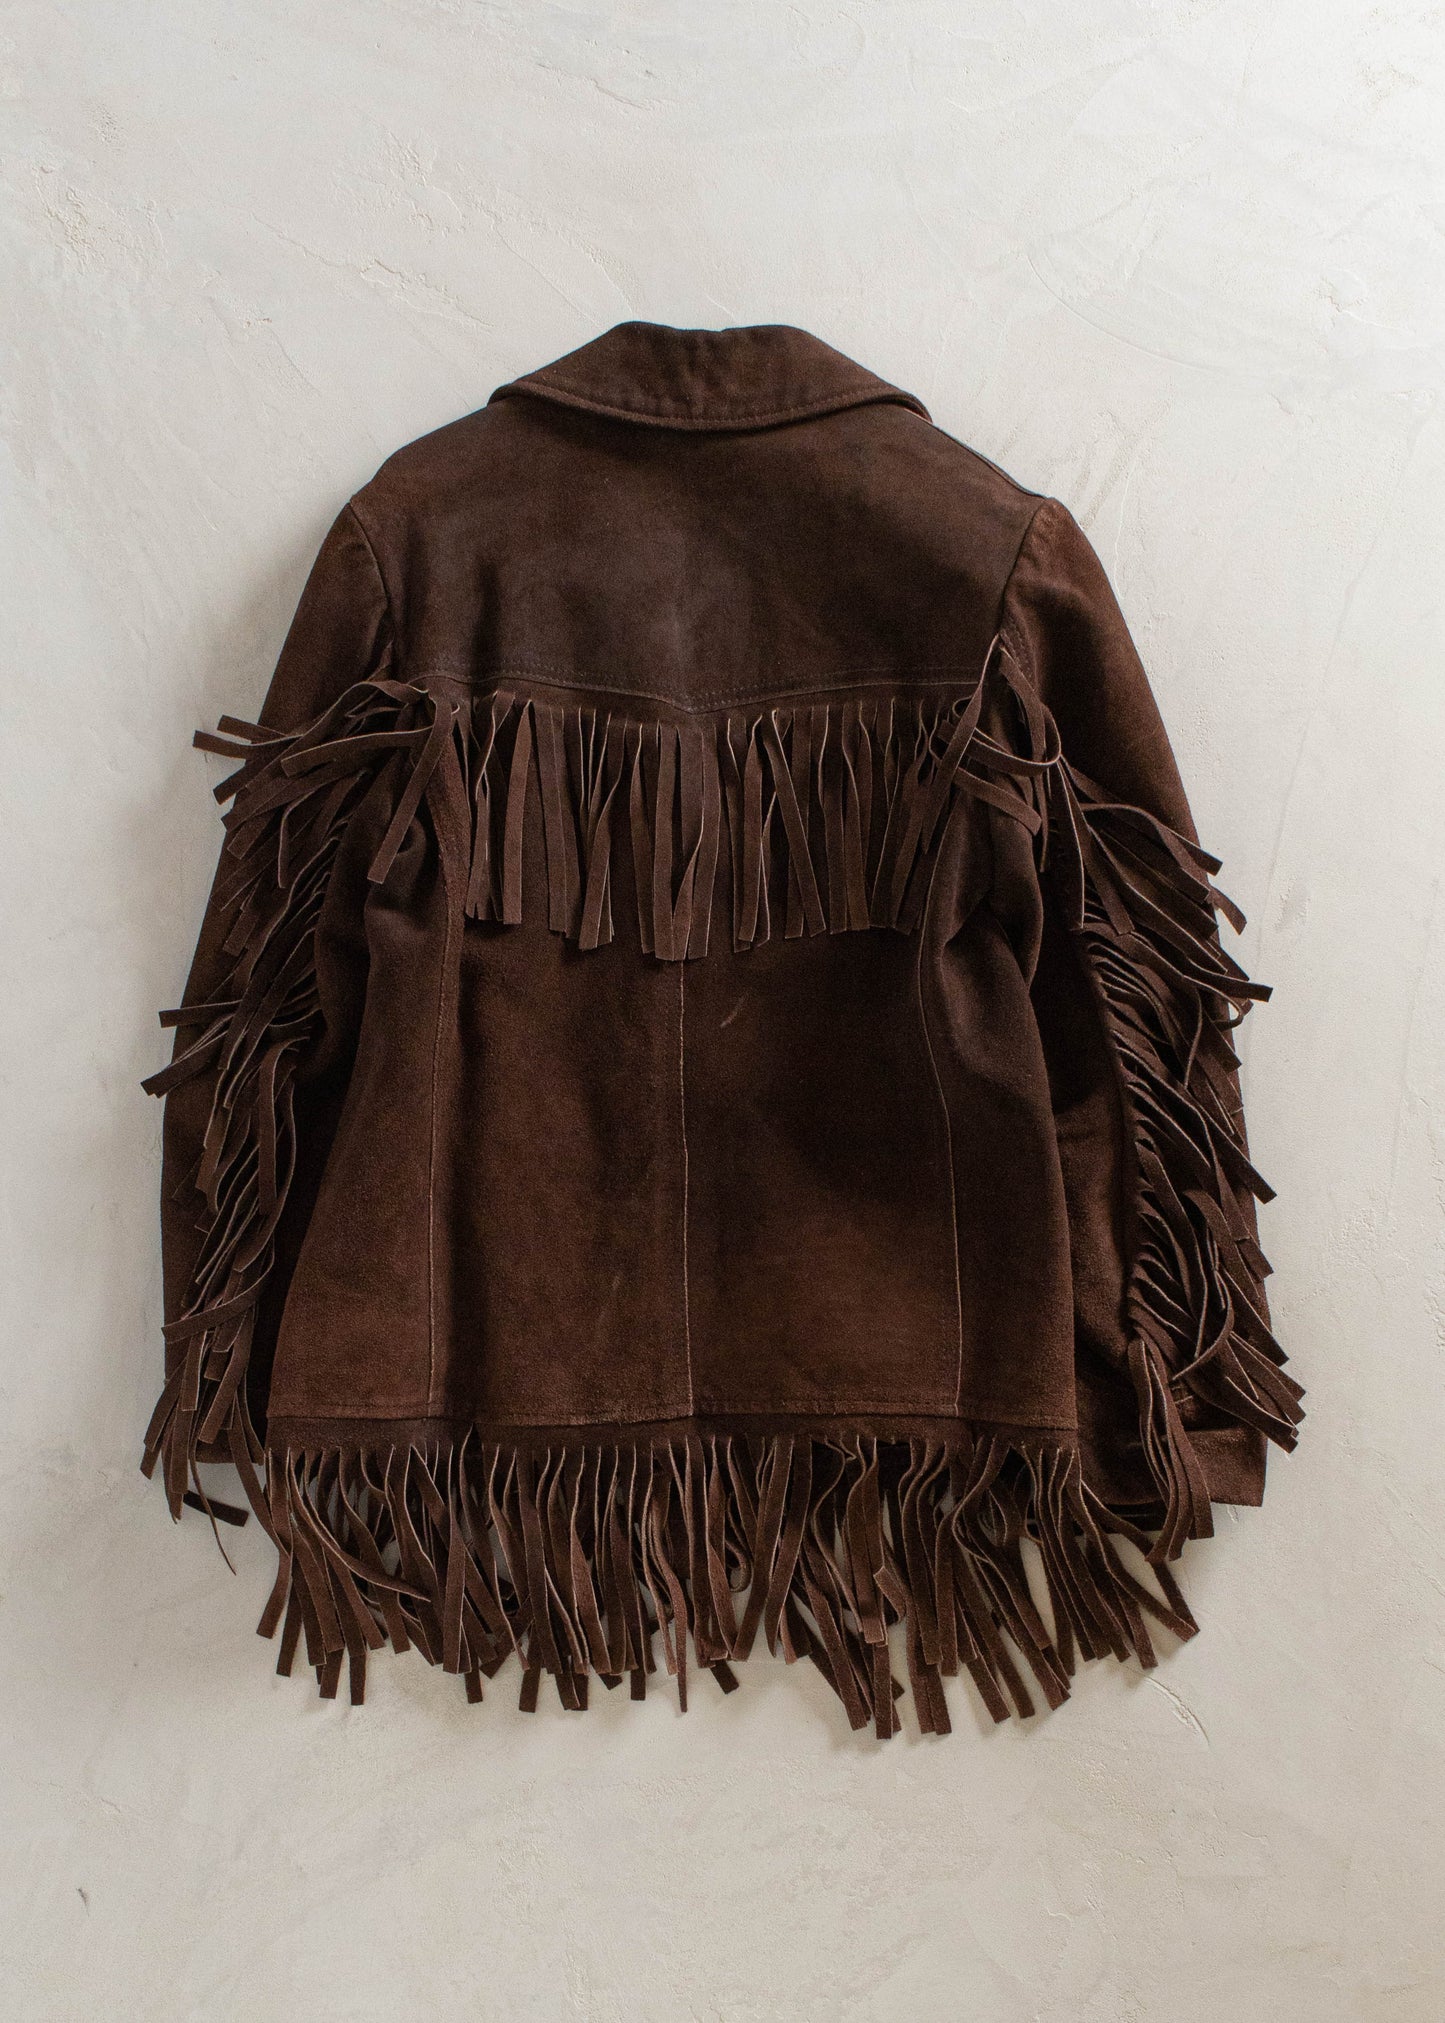 1970s Sears Fringe Suede Button Up Jacket Size XS/S